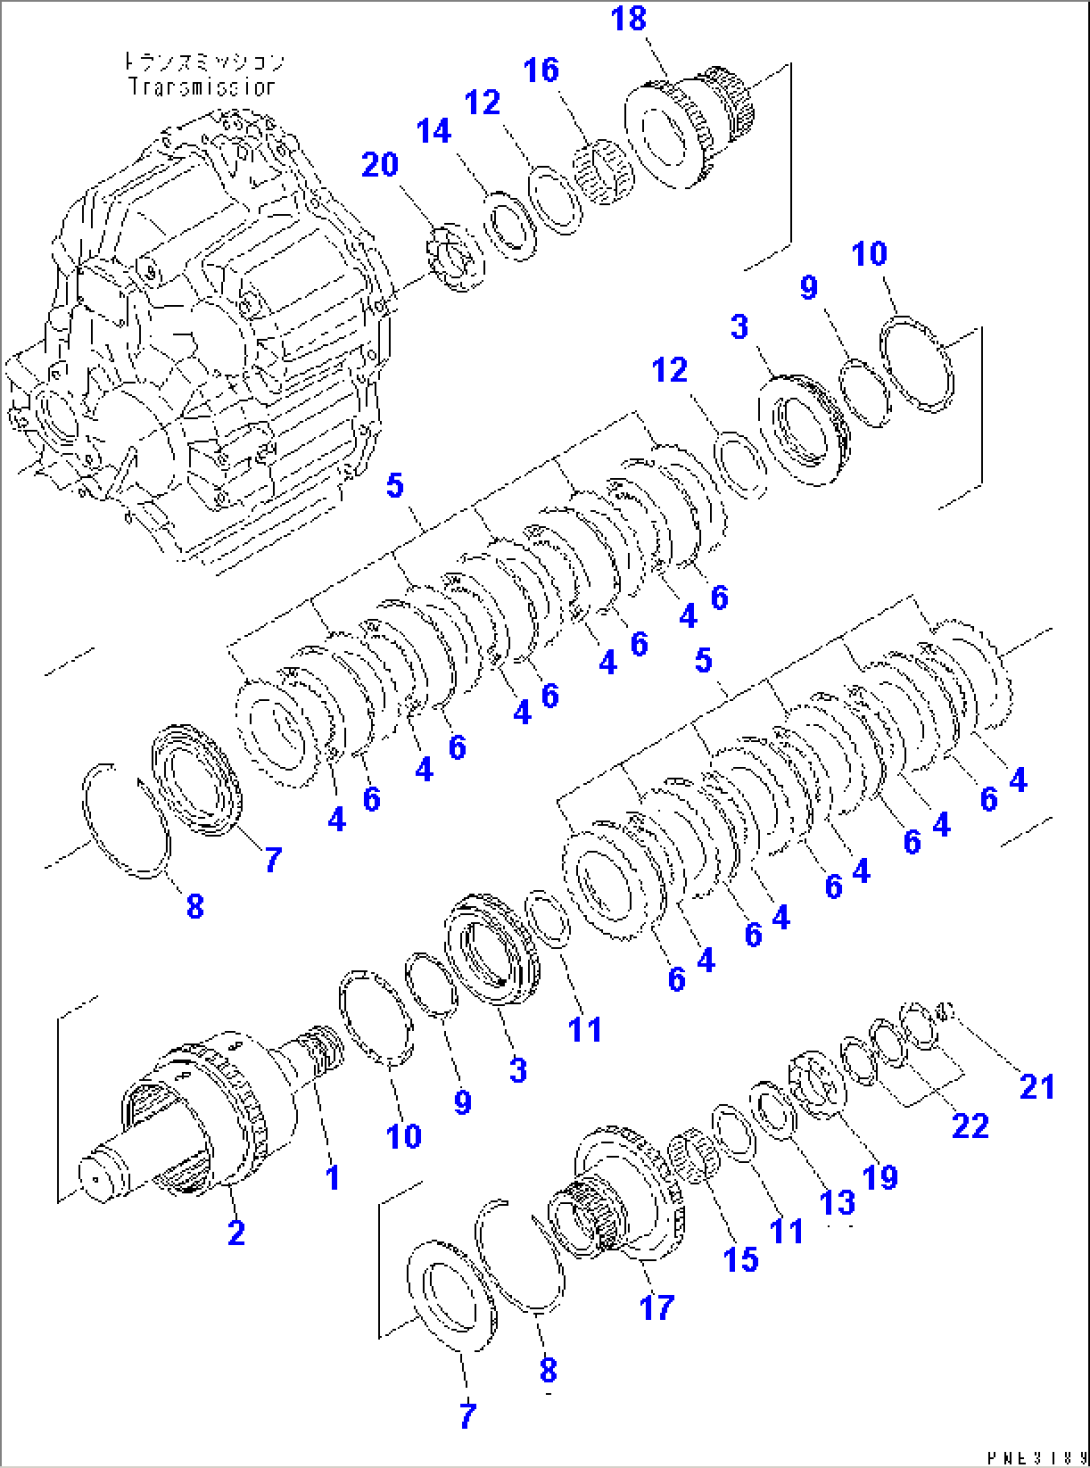 TRANSMISSION (3RD AND 4TH CLUTCH)